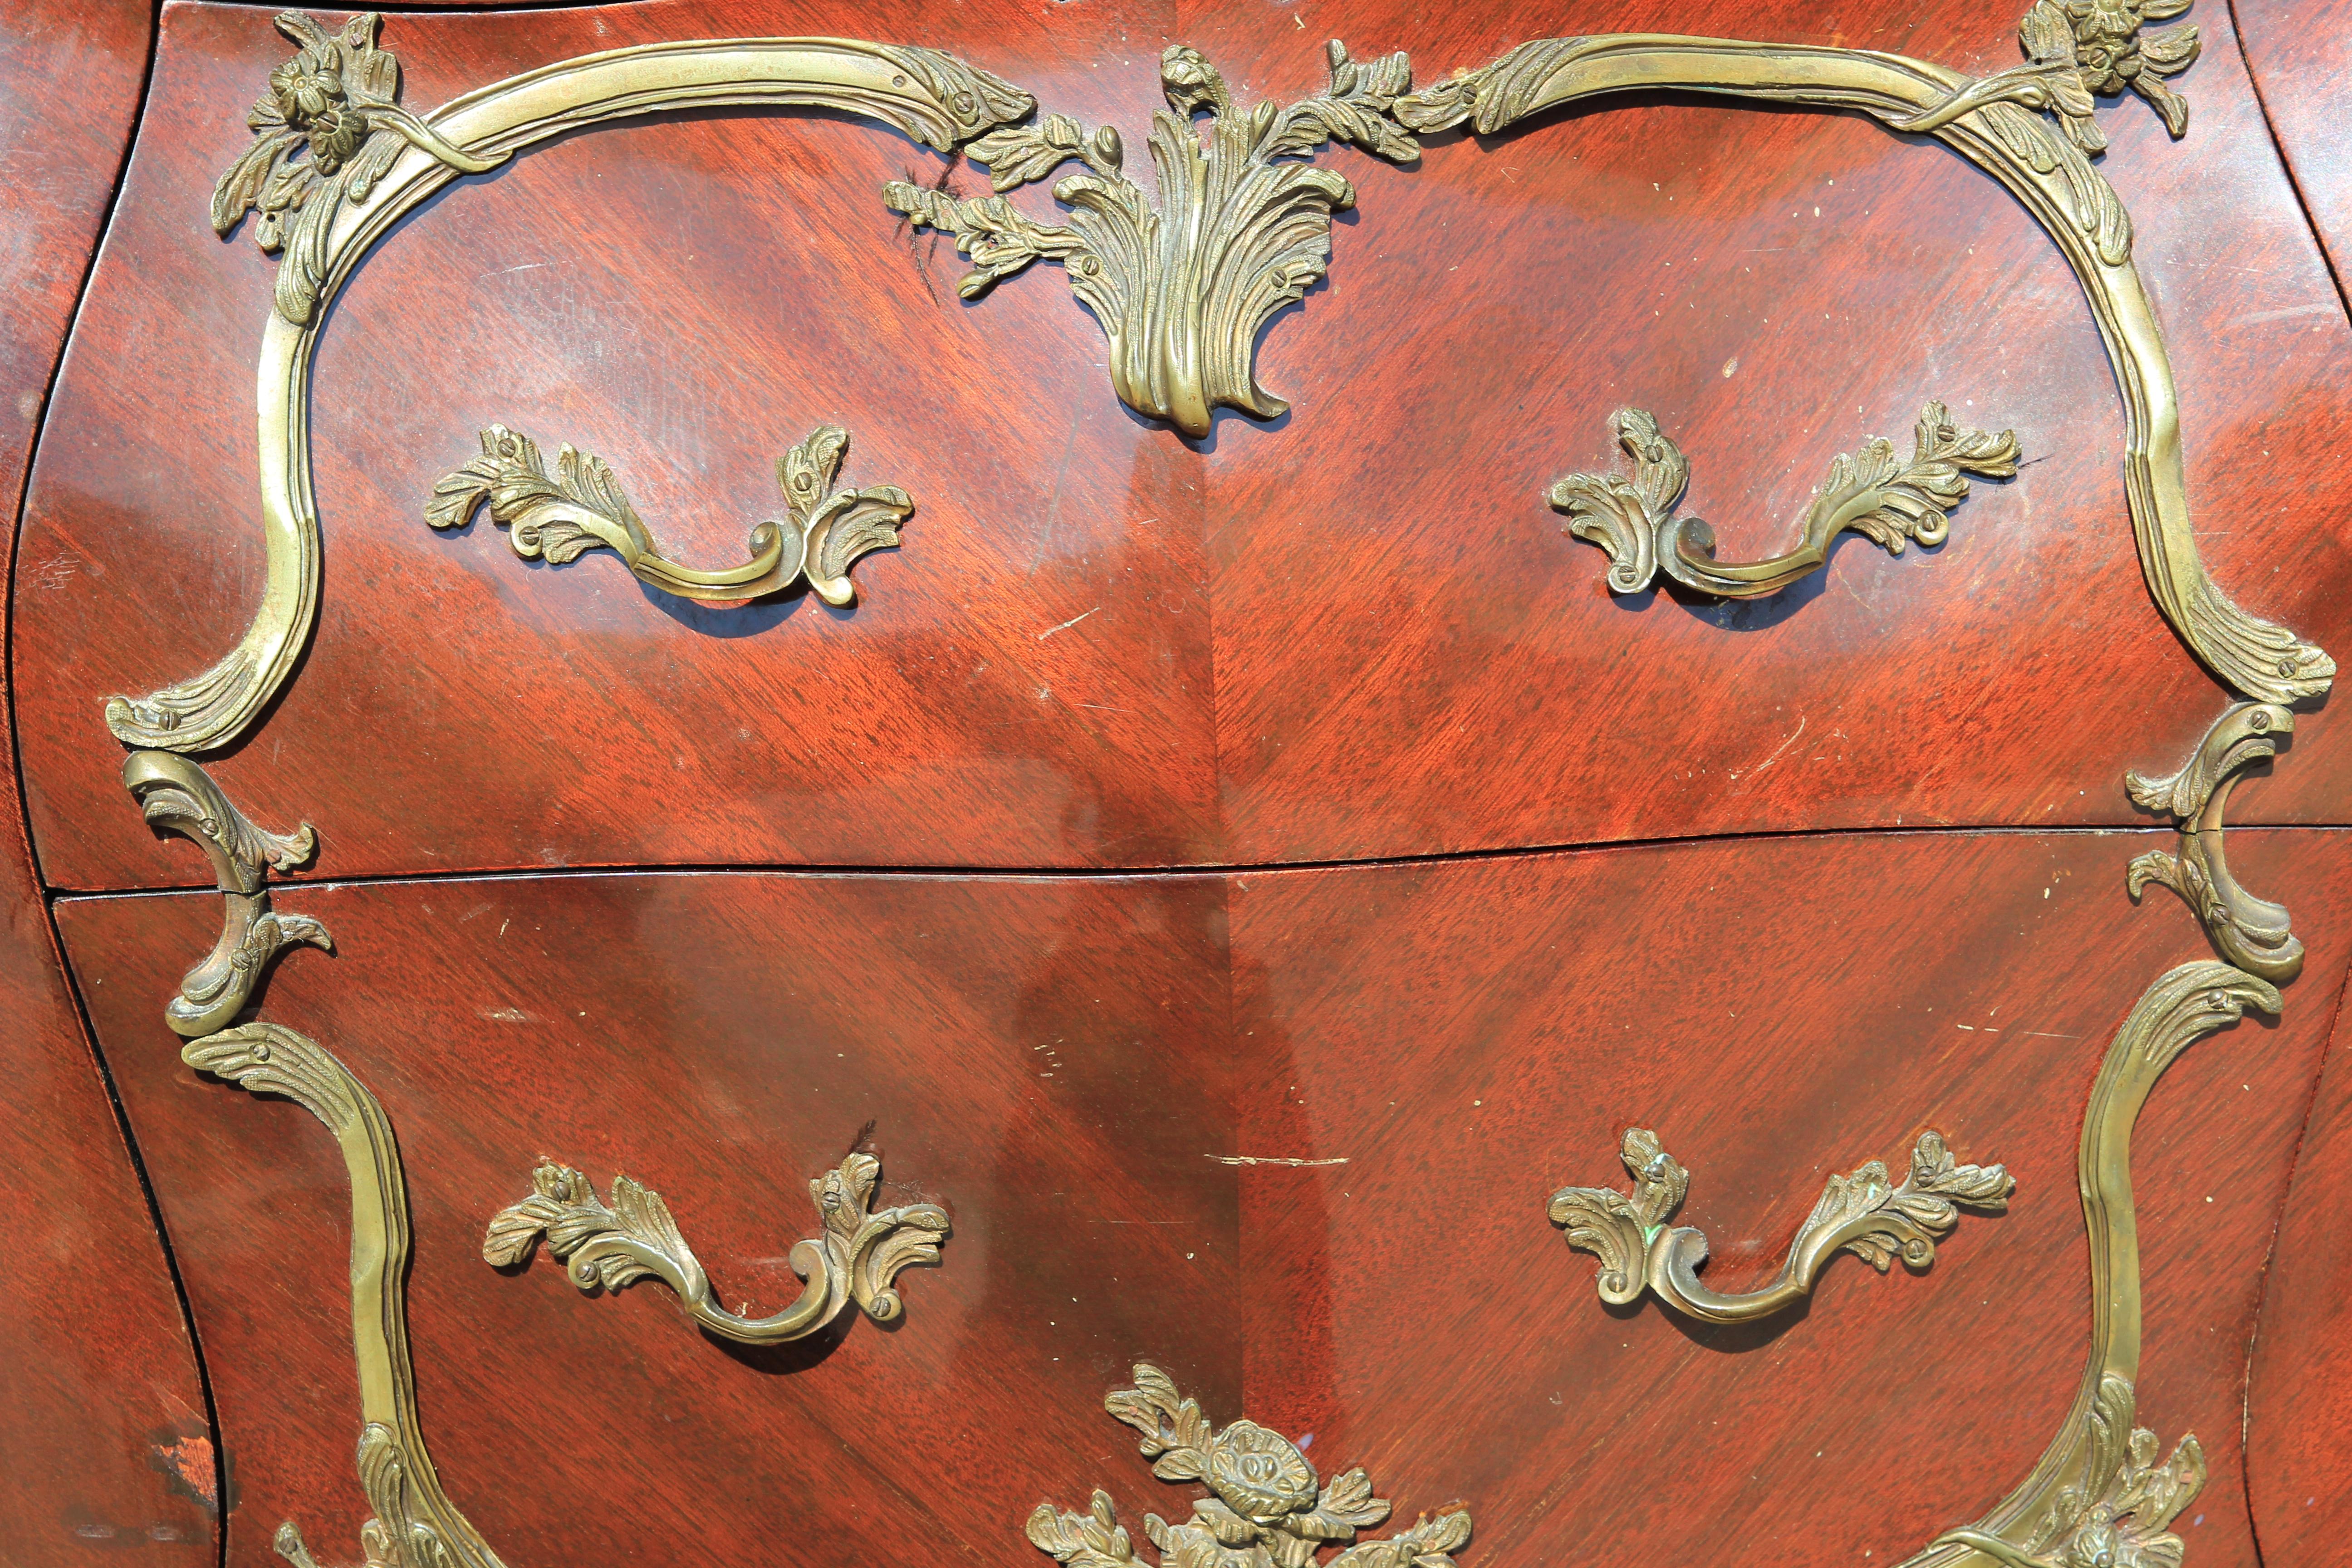 20th Century Small Ornate Ormolu Mounted French Louis XVI Style Bombé Commode or Chest